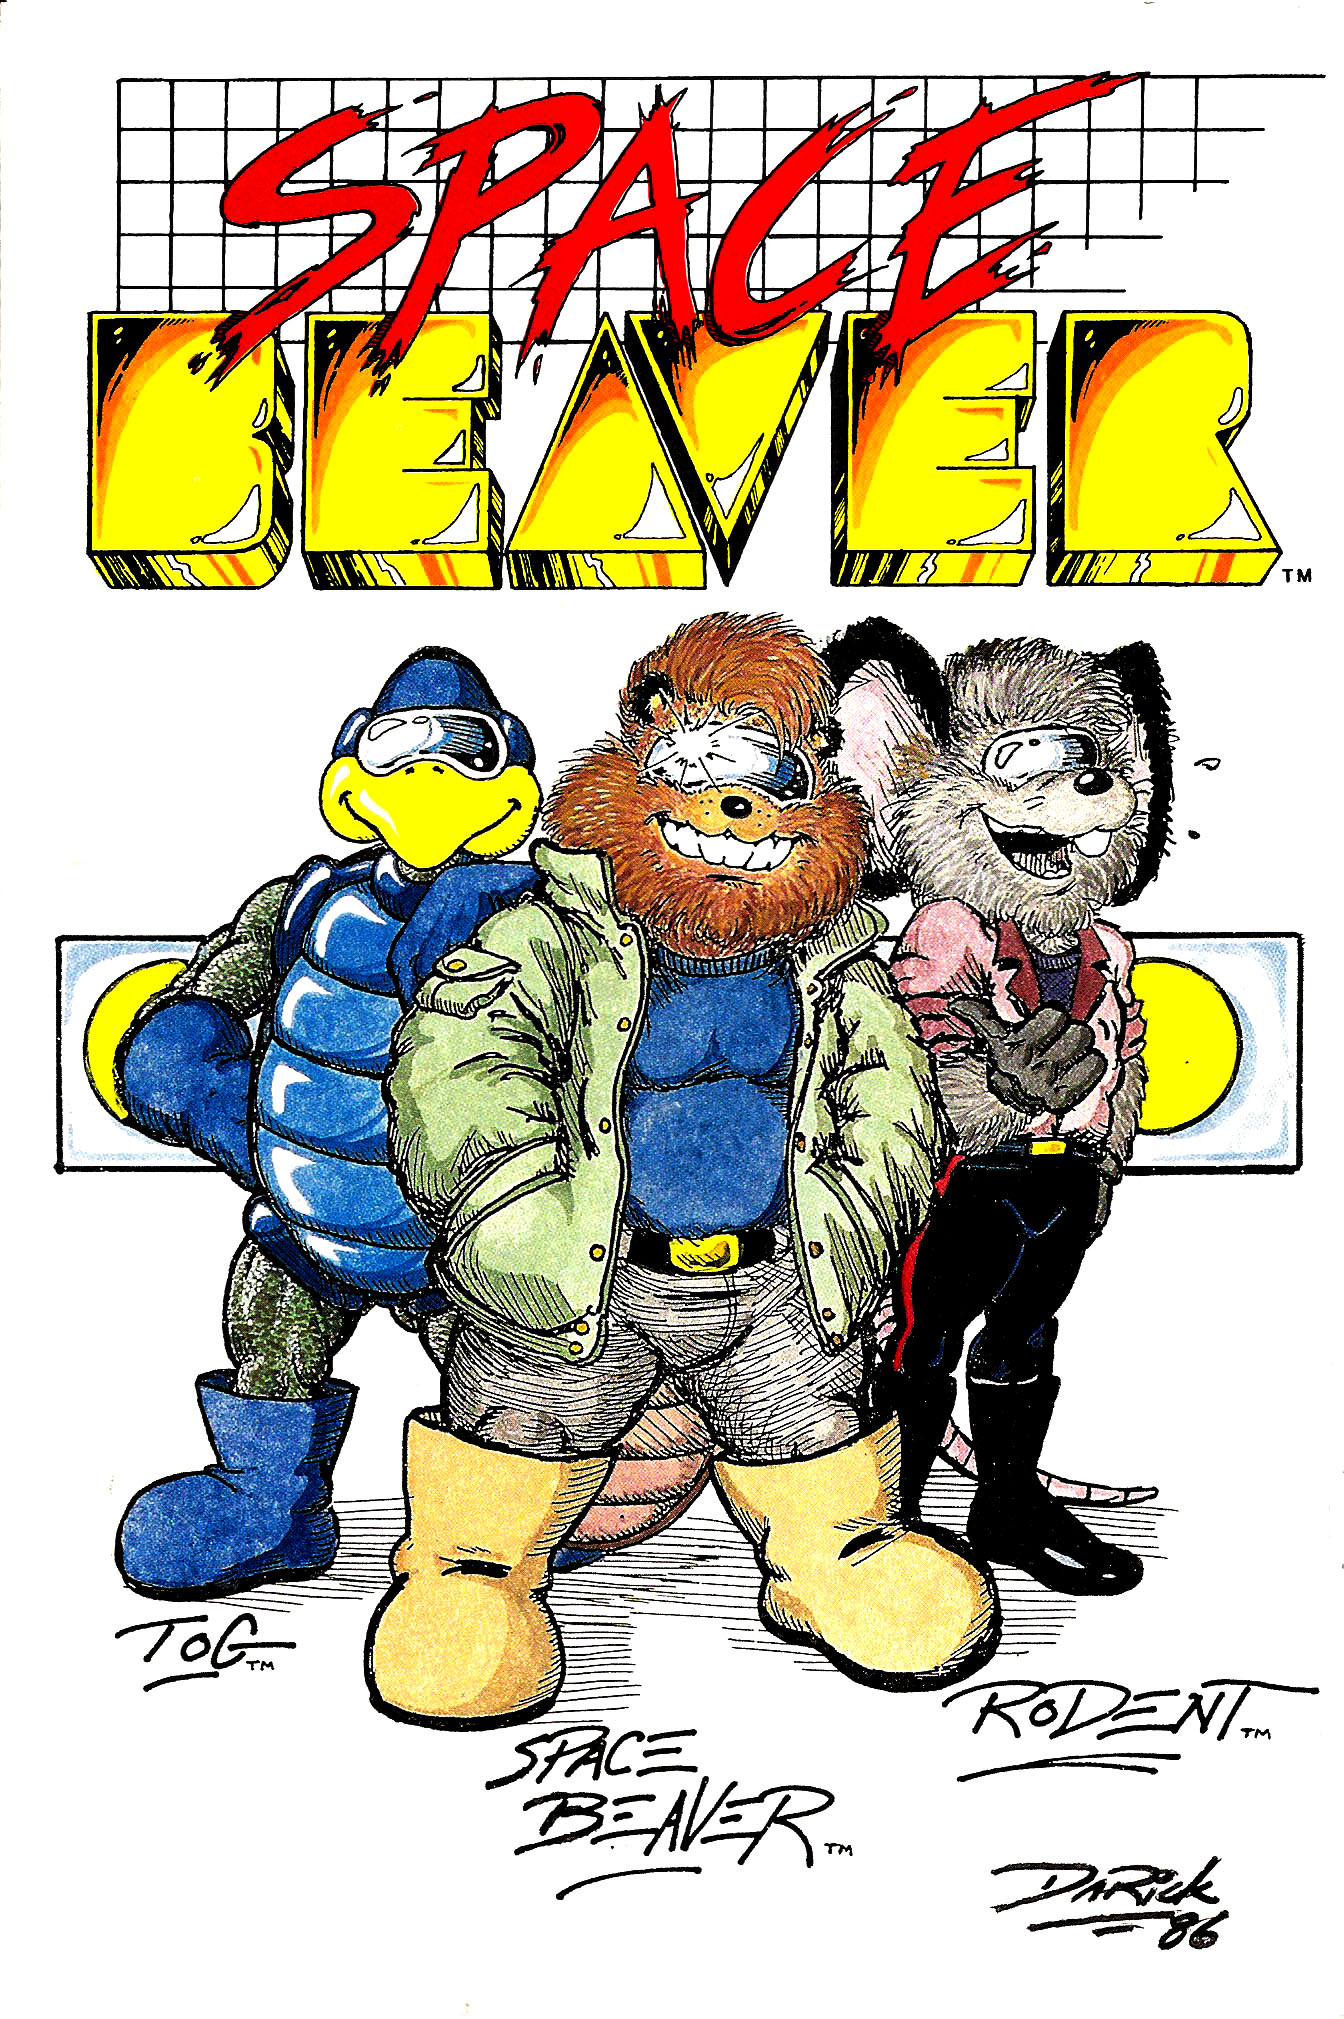 Read online Space Beaver comic -  Issue #2 - 36